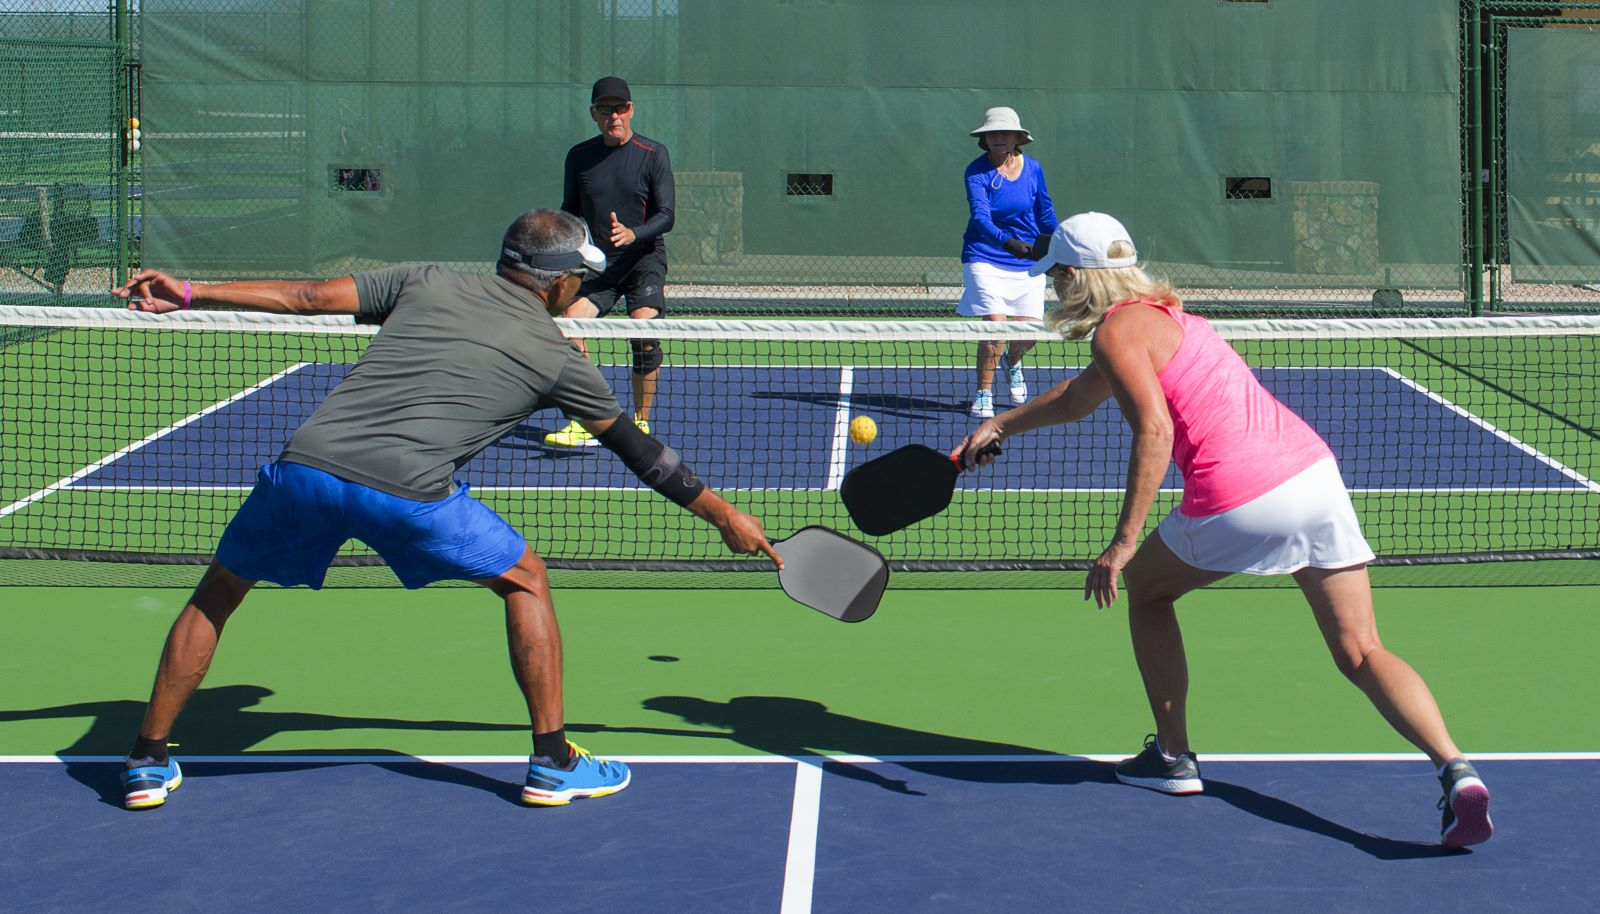 Two players playing pickleball on a court